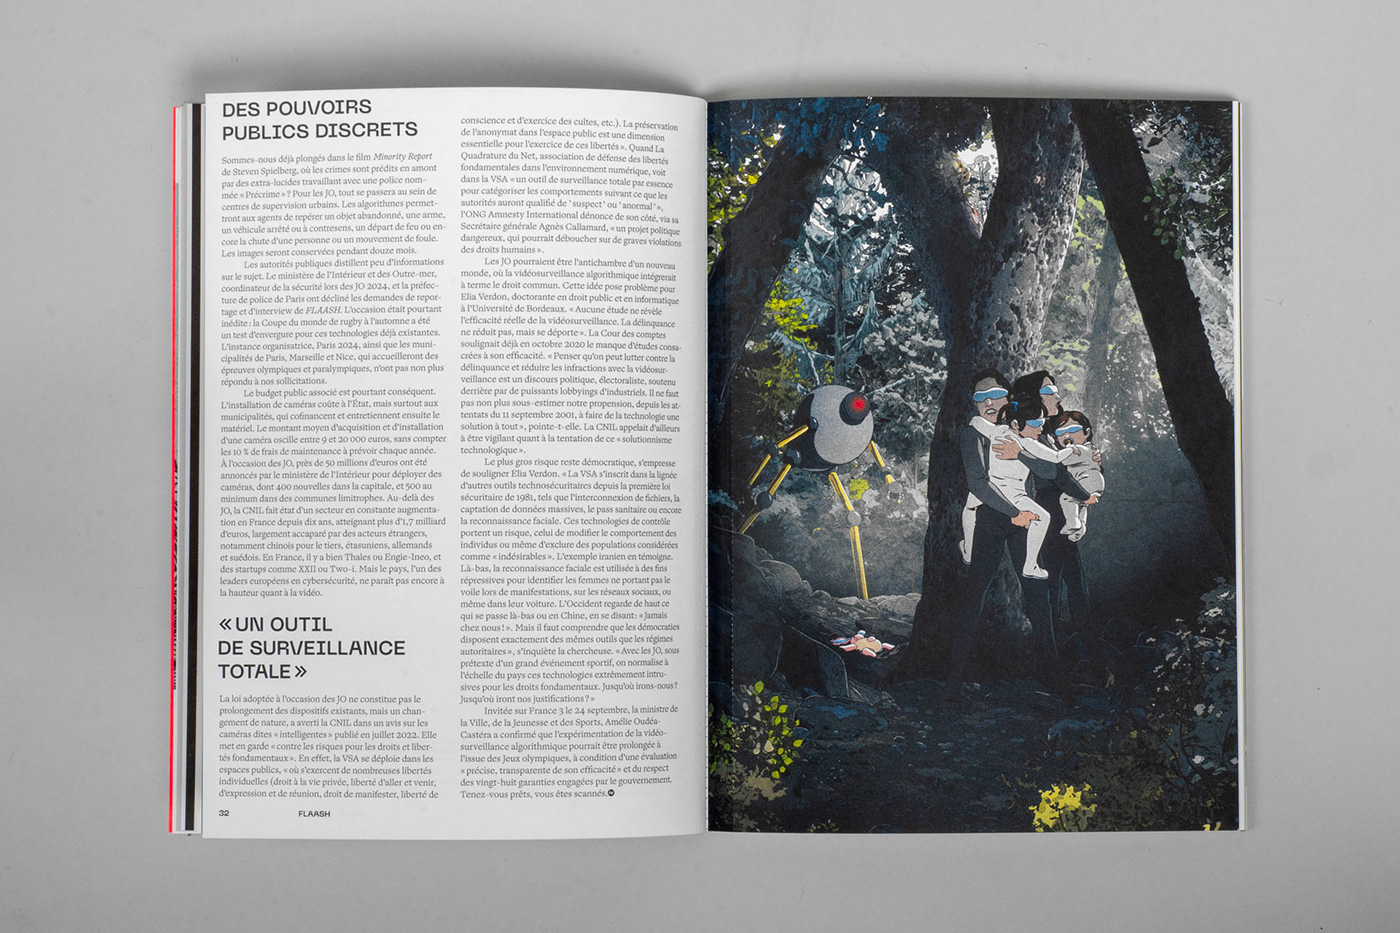 Artifact from the FLAASH’s Editorial Design: Graphic Design and Visual Narratives article on Abduzeedo